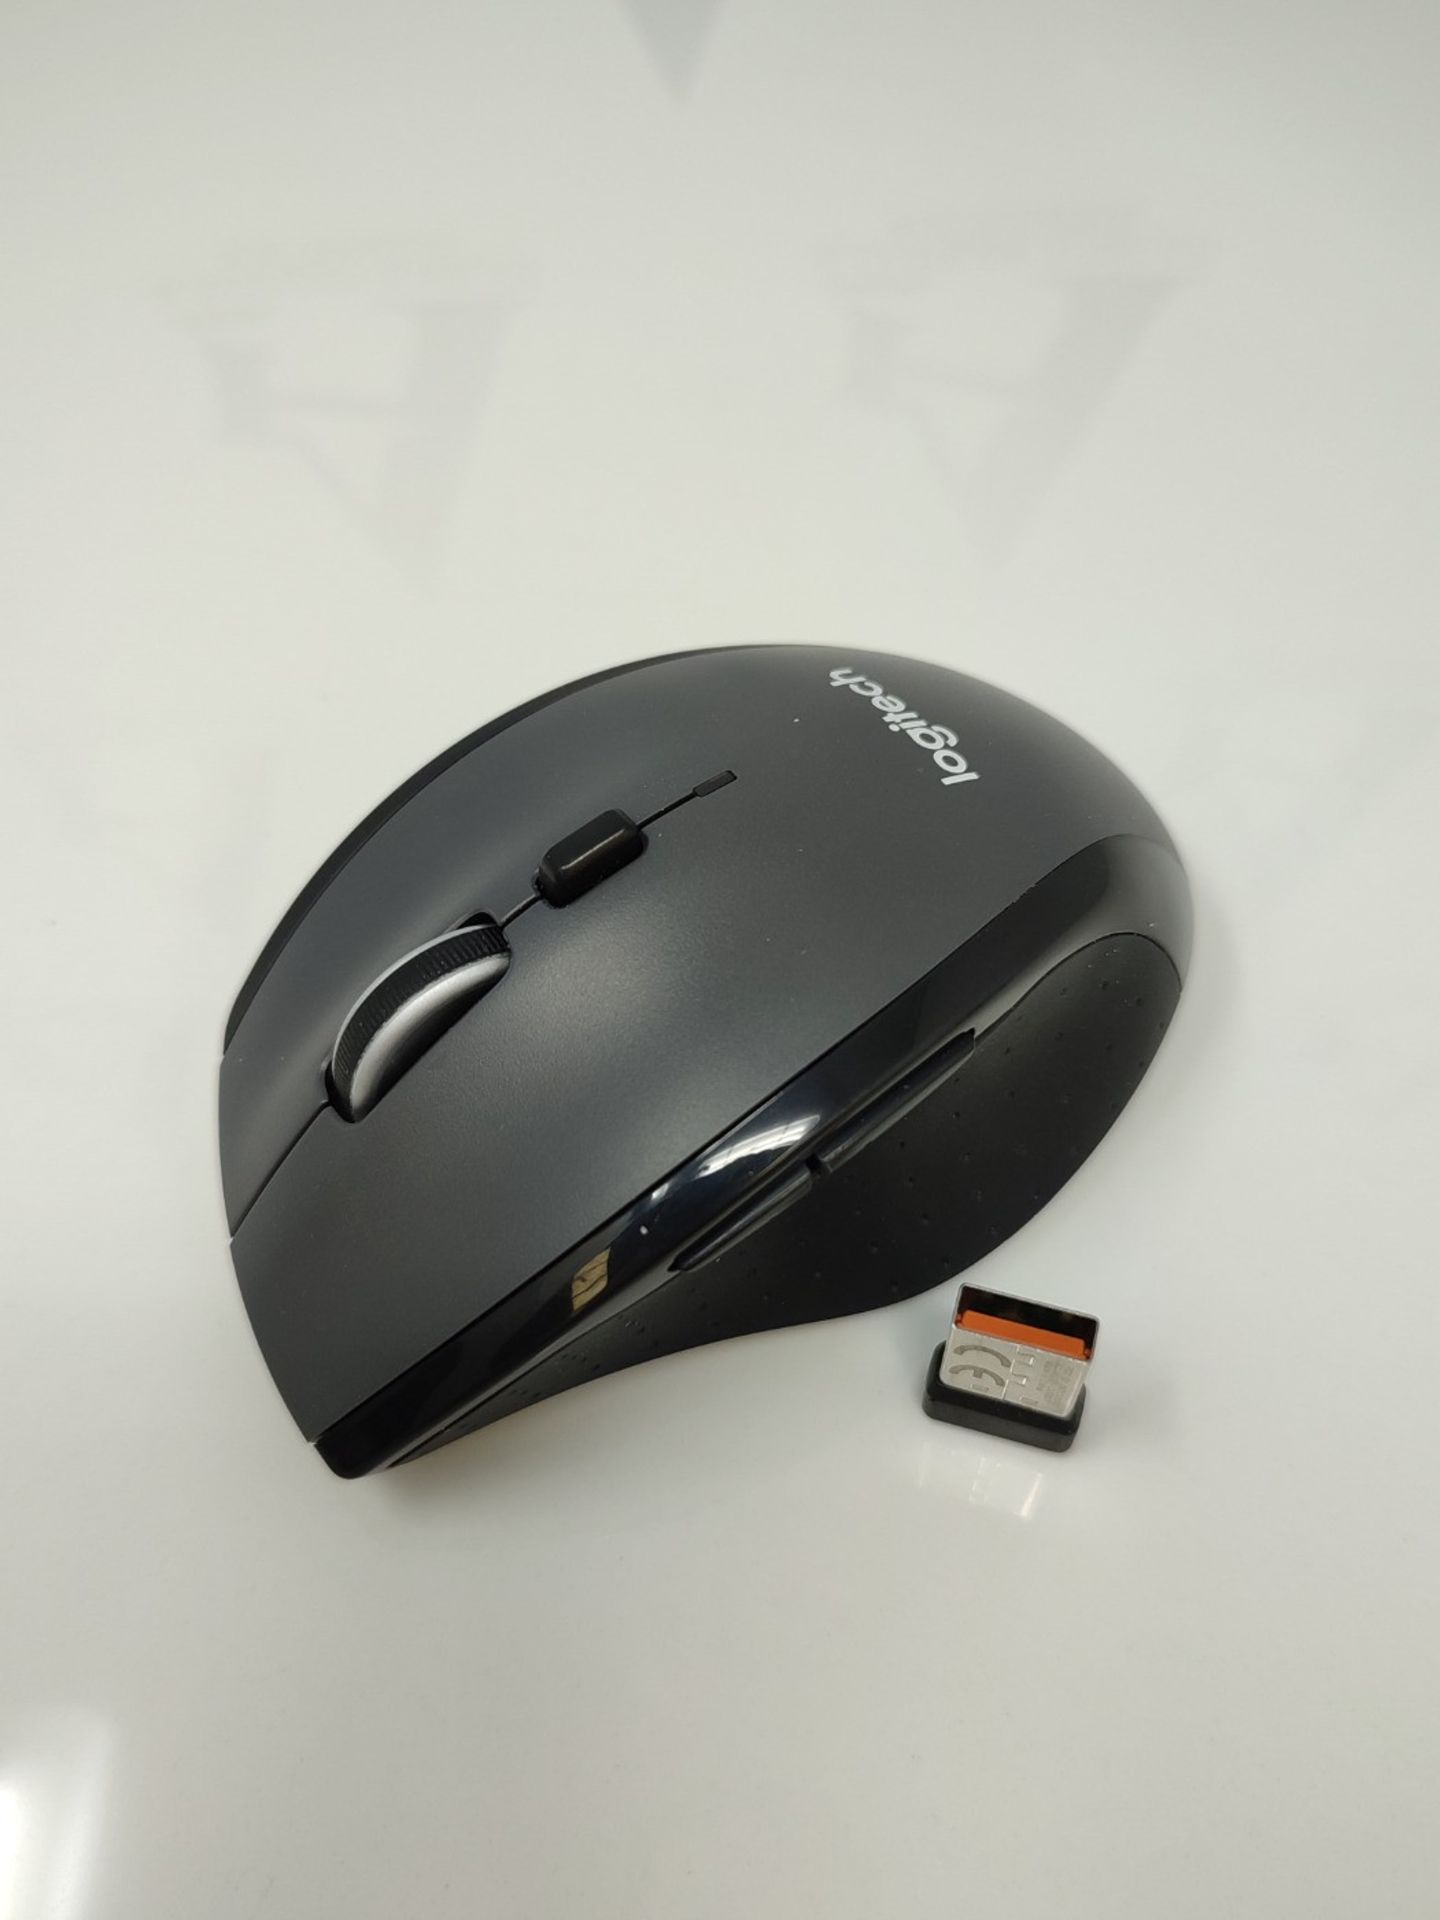 Logitech M705 Marathon Wireless Mouse, 2.4 GHz with USB Unifying Receiver, 1000 DPI, 5 - Image 2 of 2